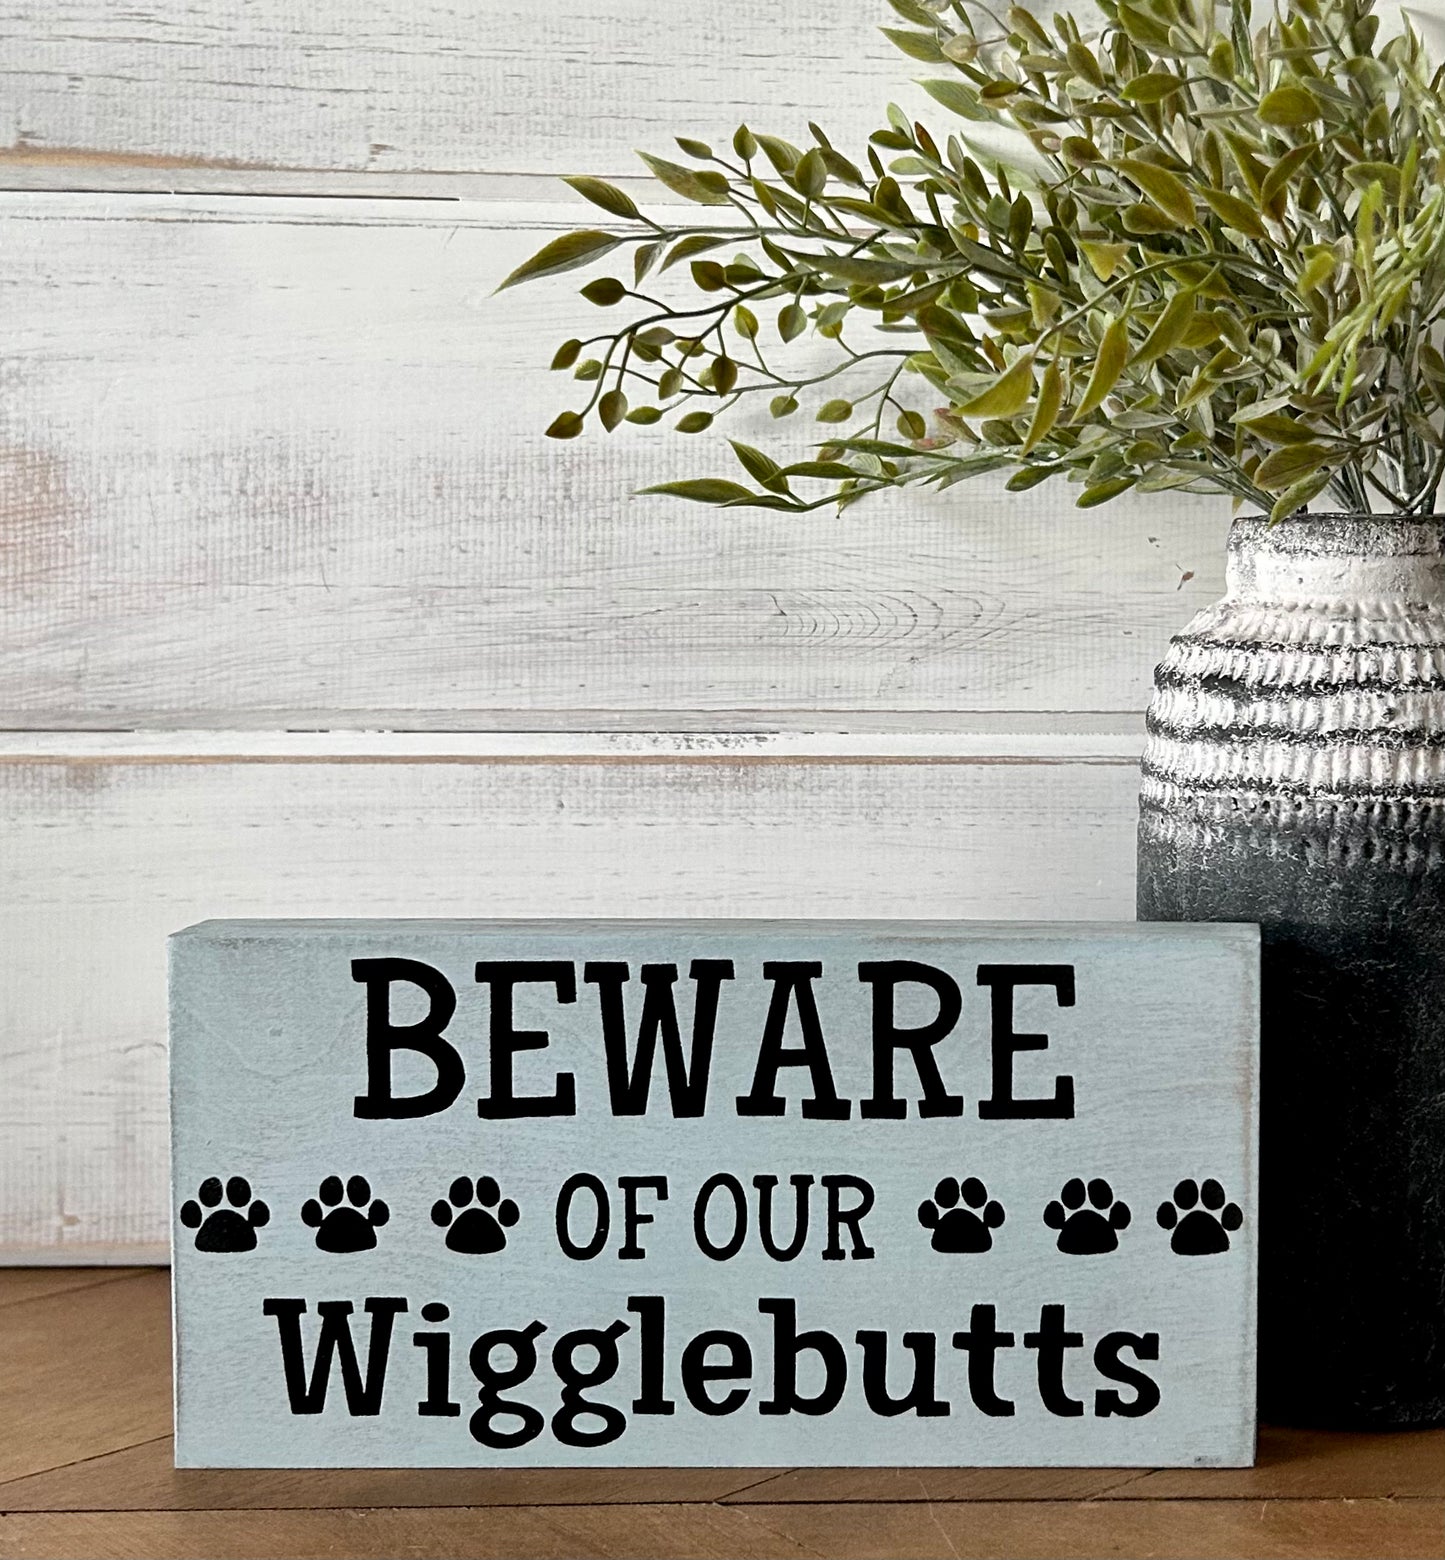 Beware of Our Wigglebutts - Rustic Wood Shelf Sitter